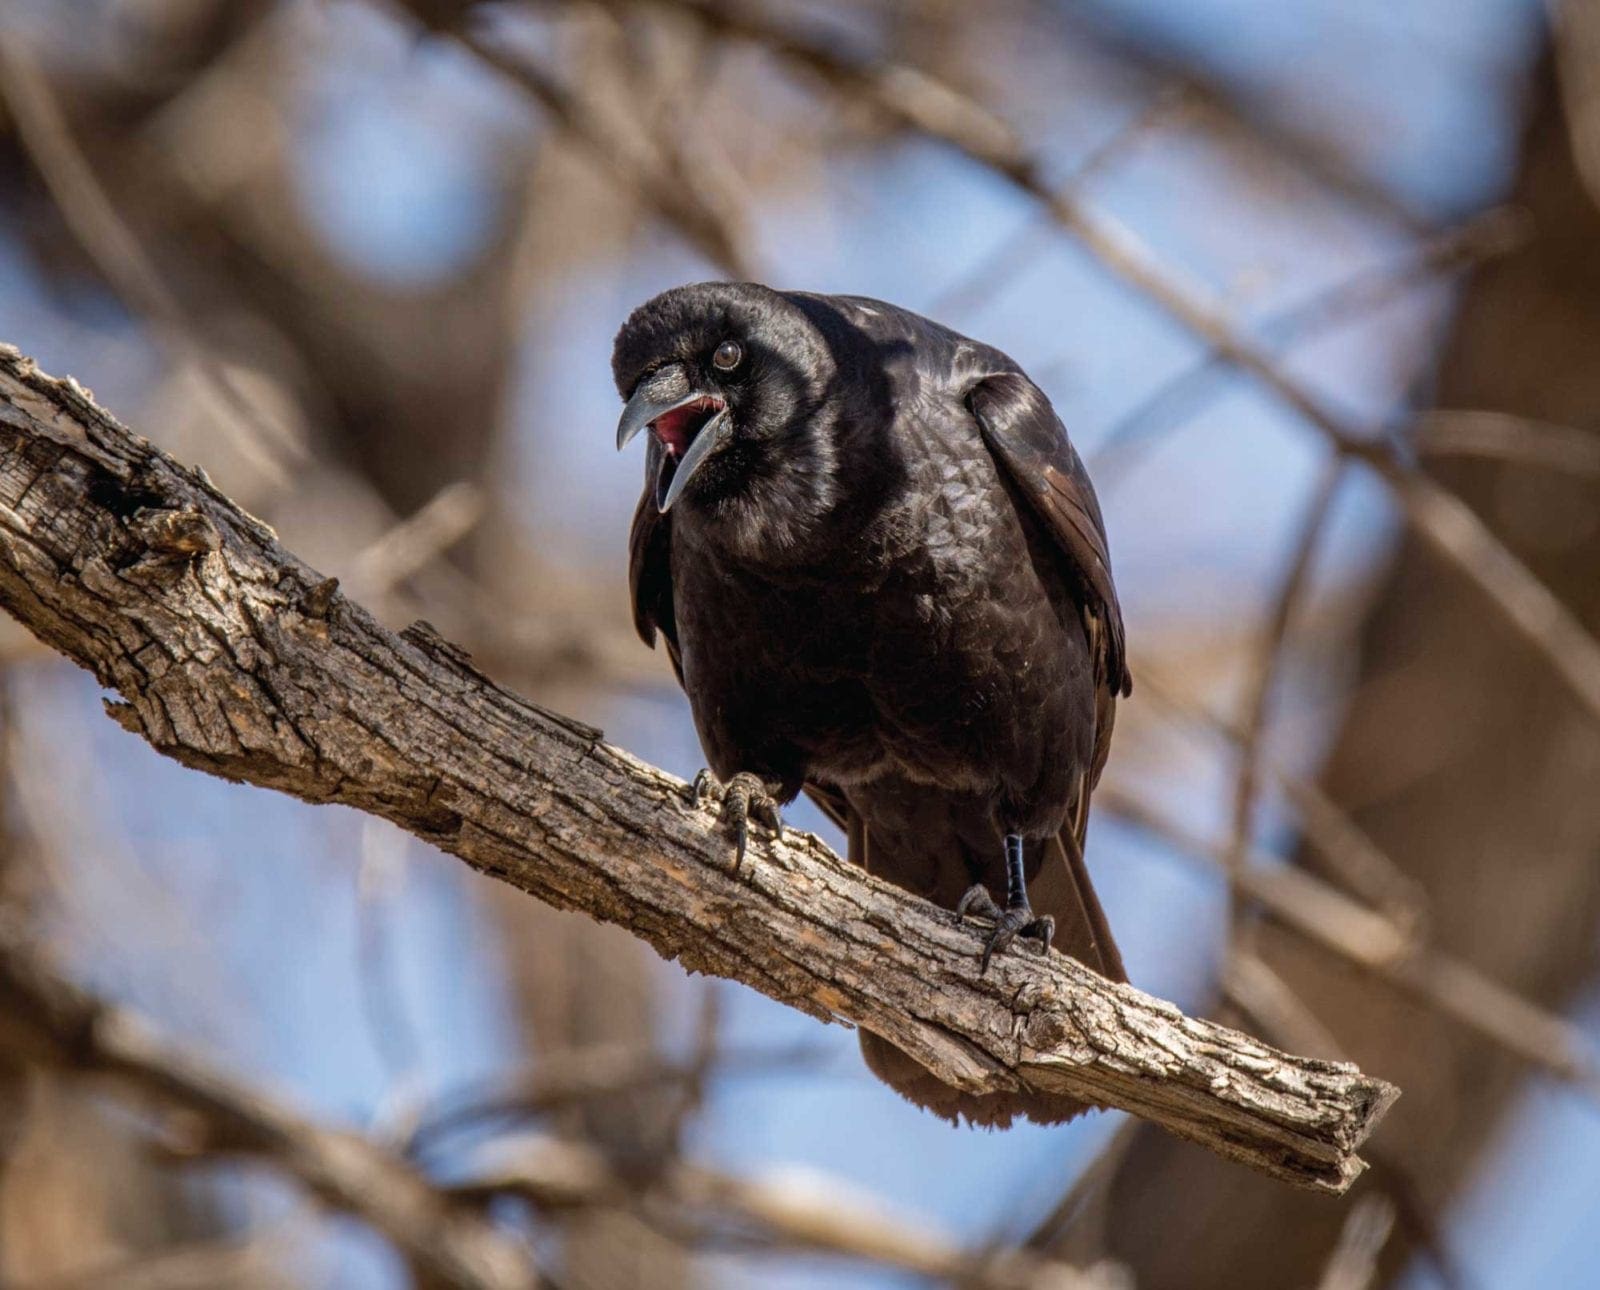 An American crow sitting on a branch.